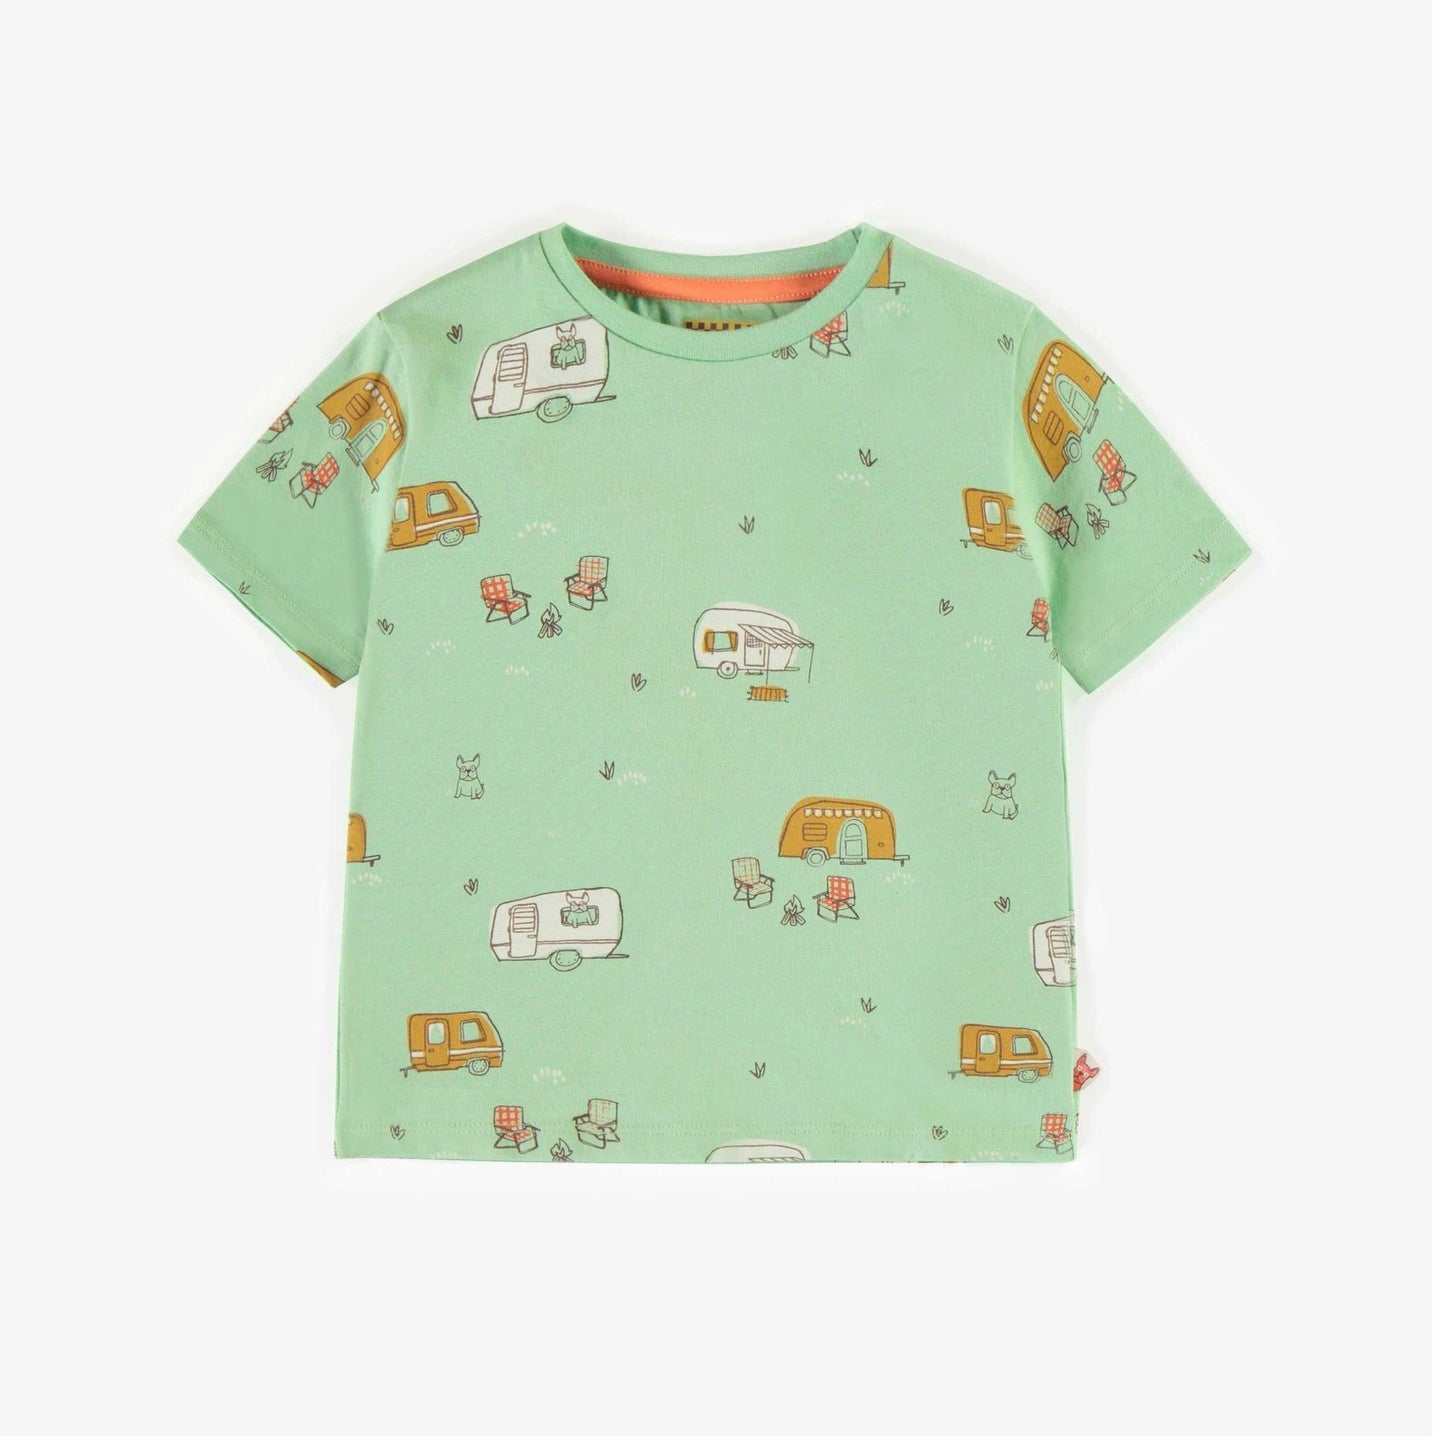 Green patterned t-shirt in cotton straight fit